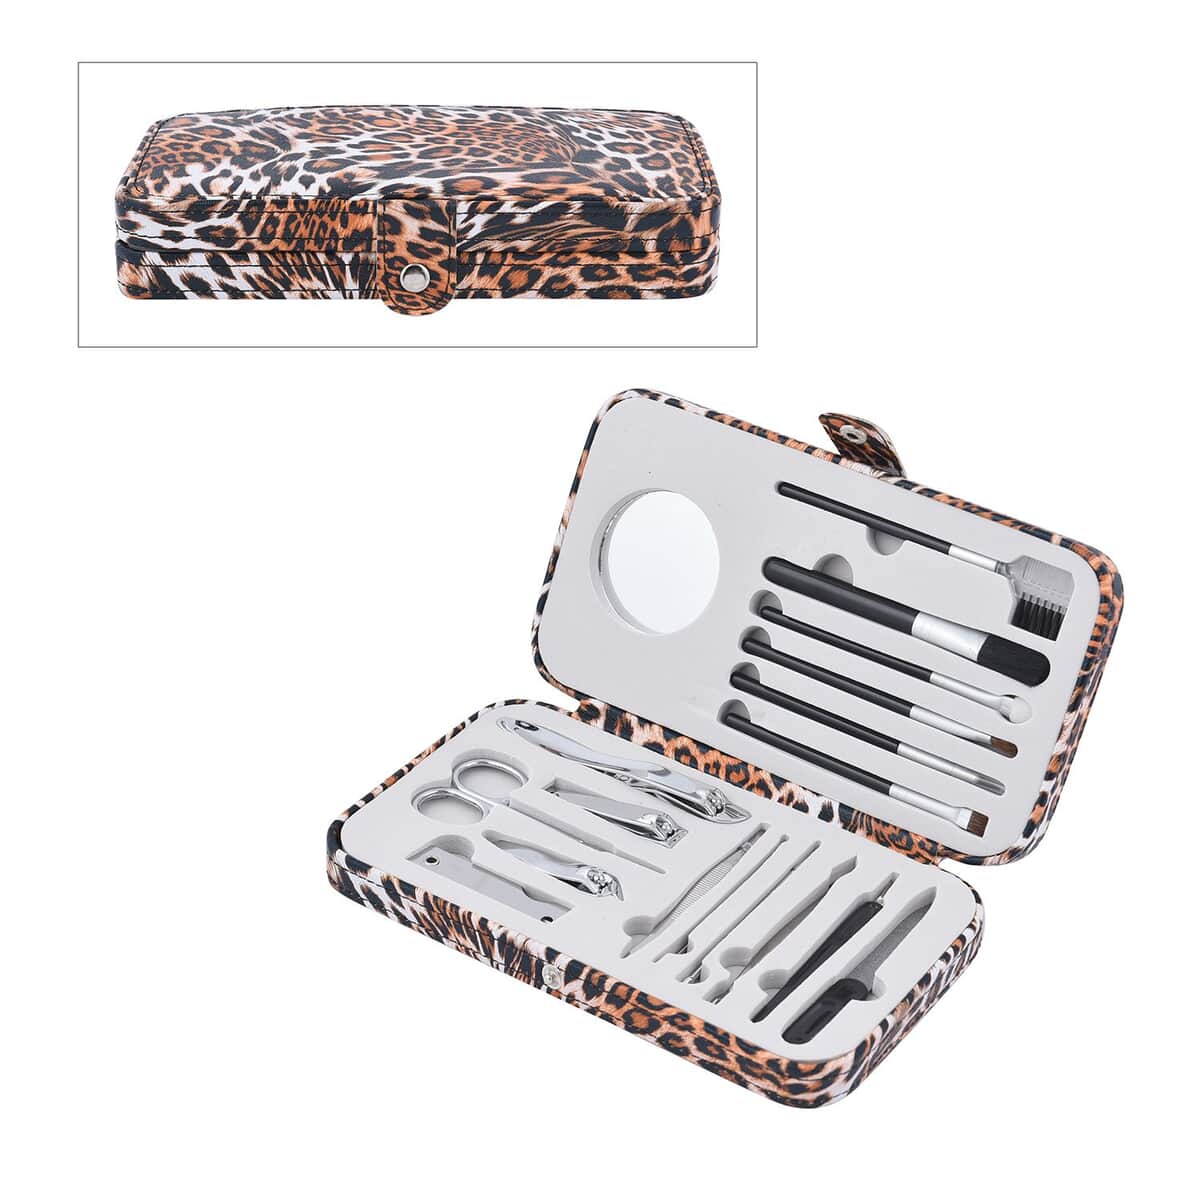 18 Pc Grooming and Cosmetic Manicure Kit in Leopard Pattern Faux Leather Snap Case image number 0